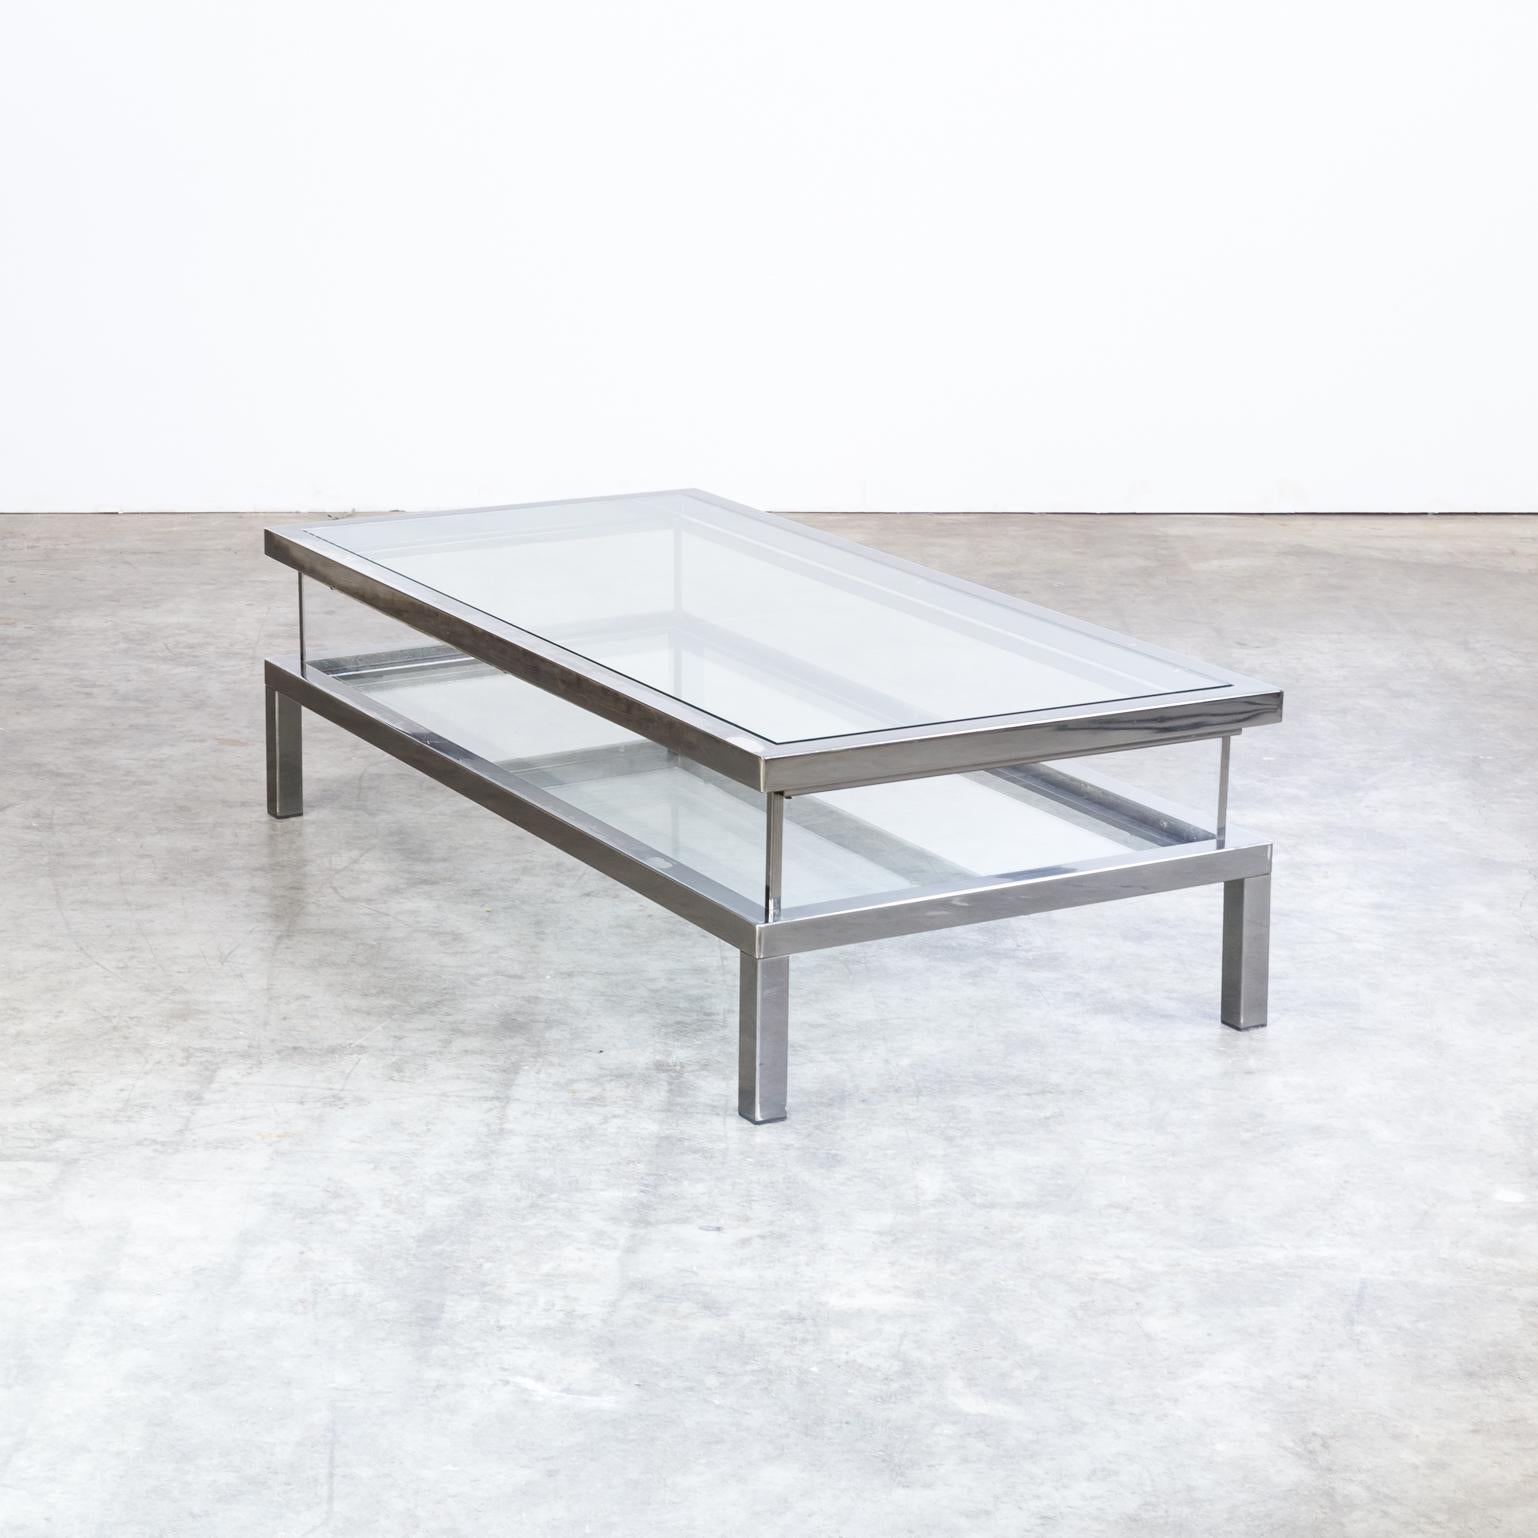 1950s Metal and Glass French Sliding Coffee Table (Mitte des 20. Jahrhunderts) im Angebot